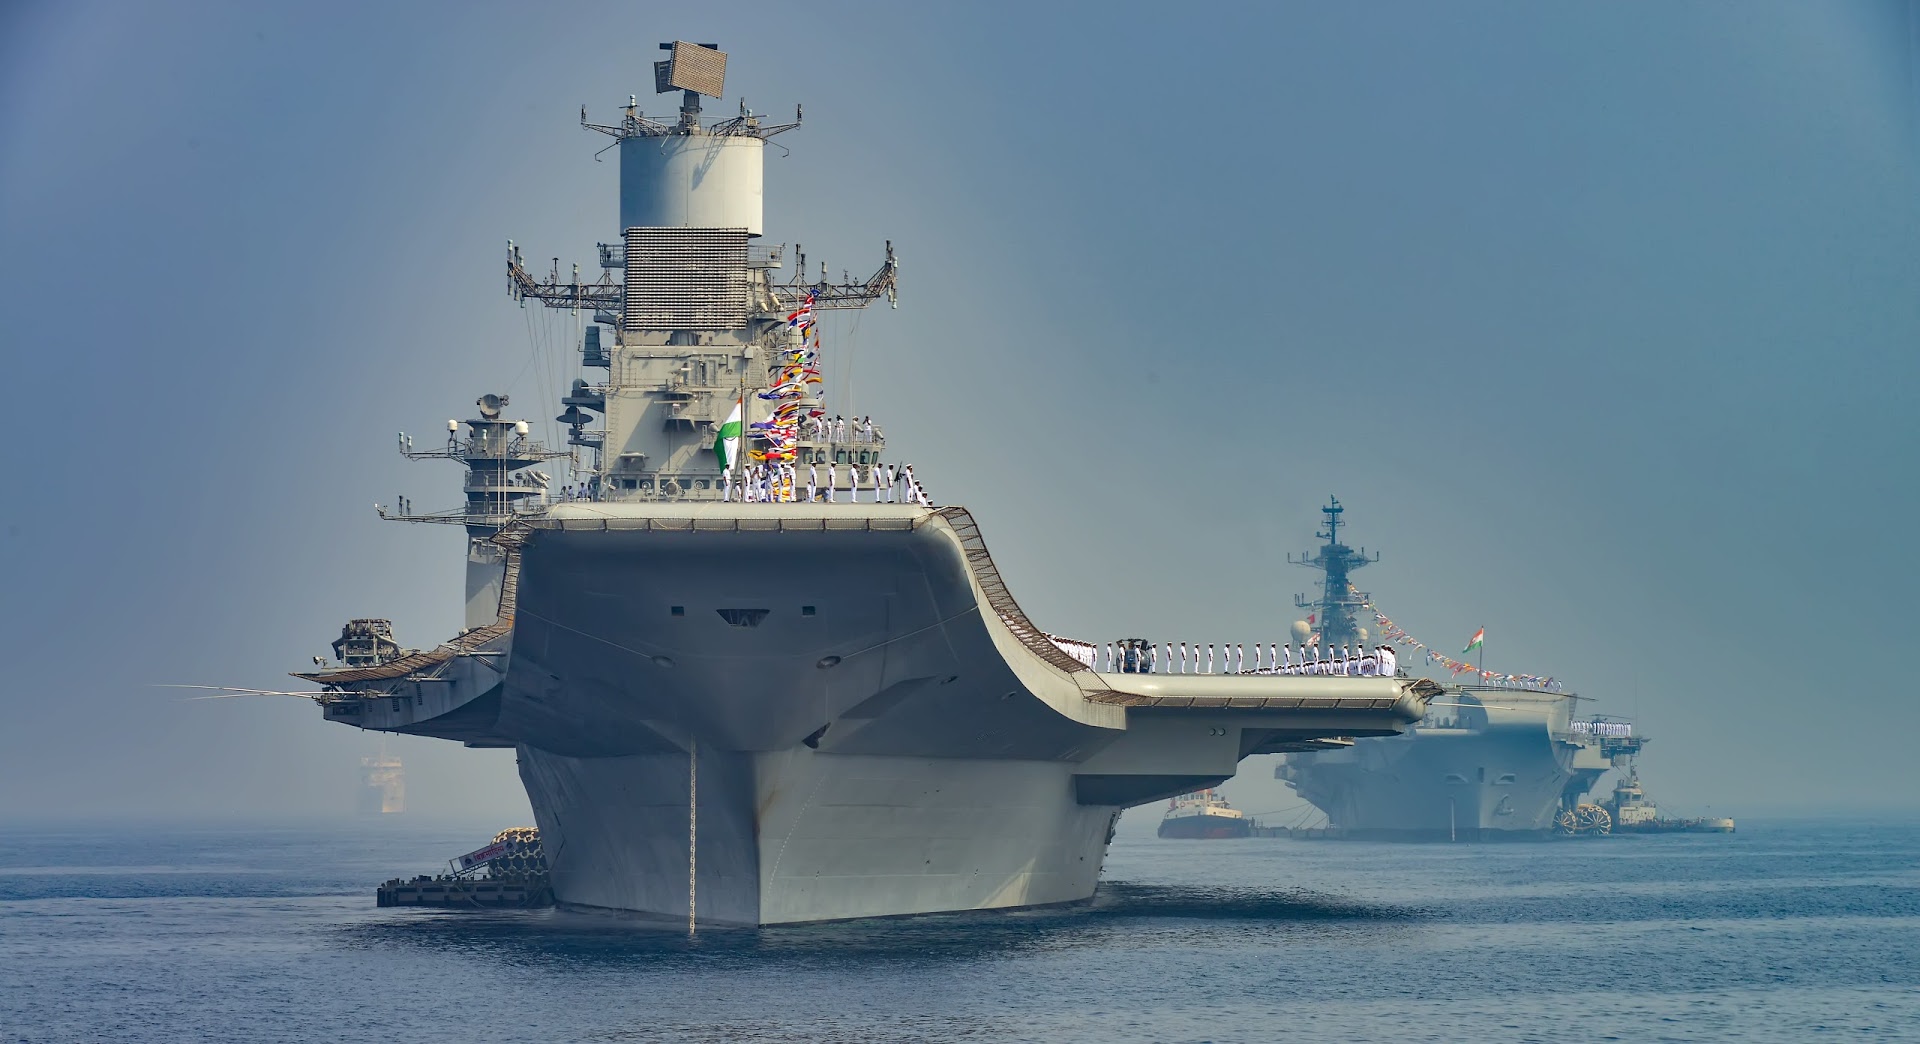 Indian aircraft carriers INS Viraat and INS Vikramaditya at the International Fleet Review 2016.